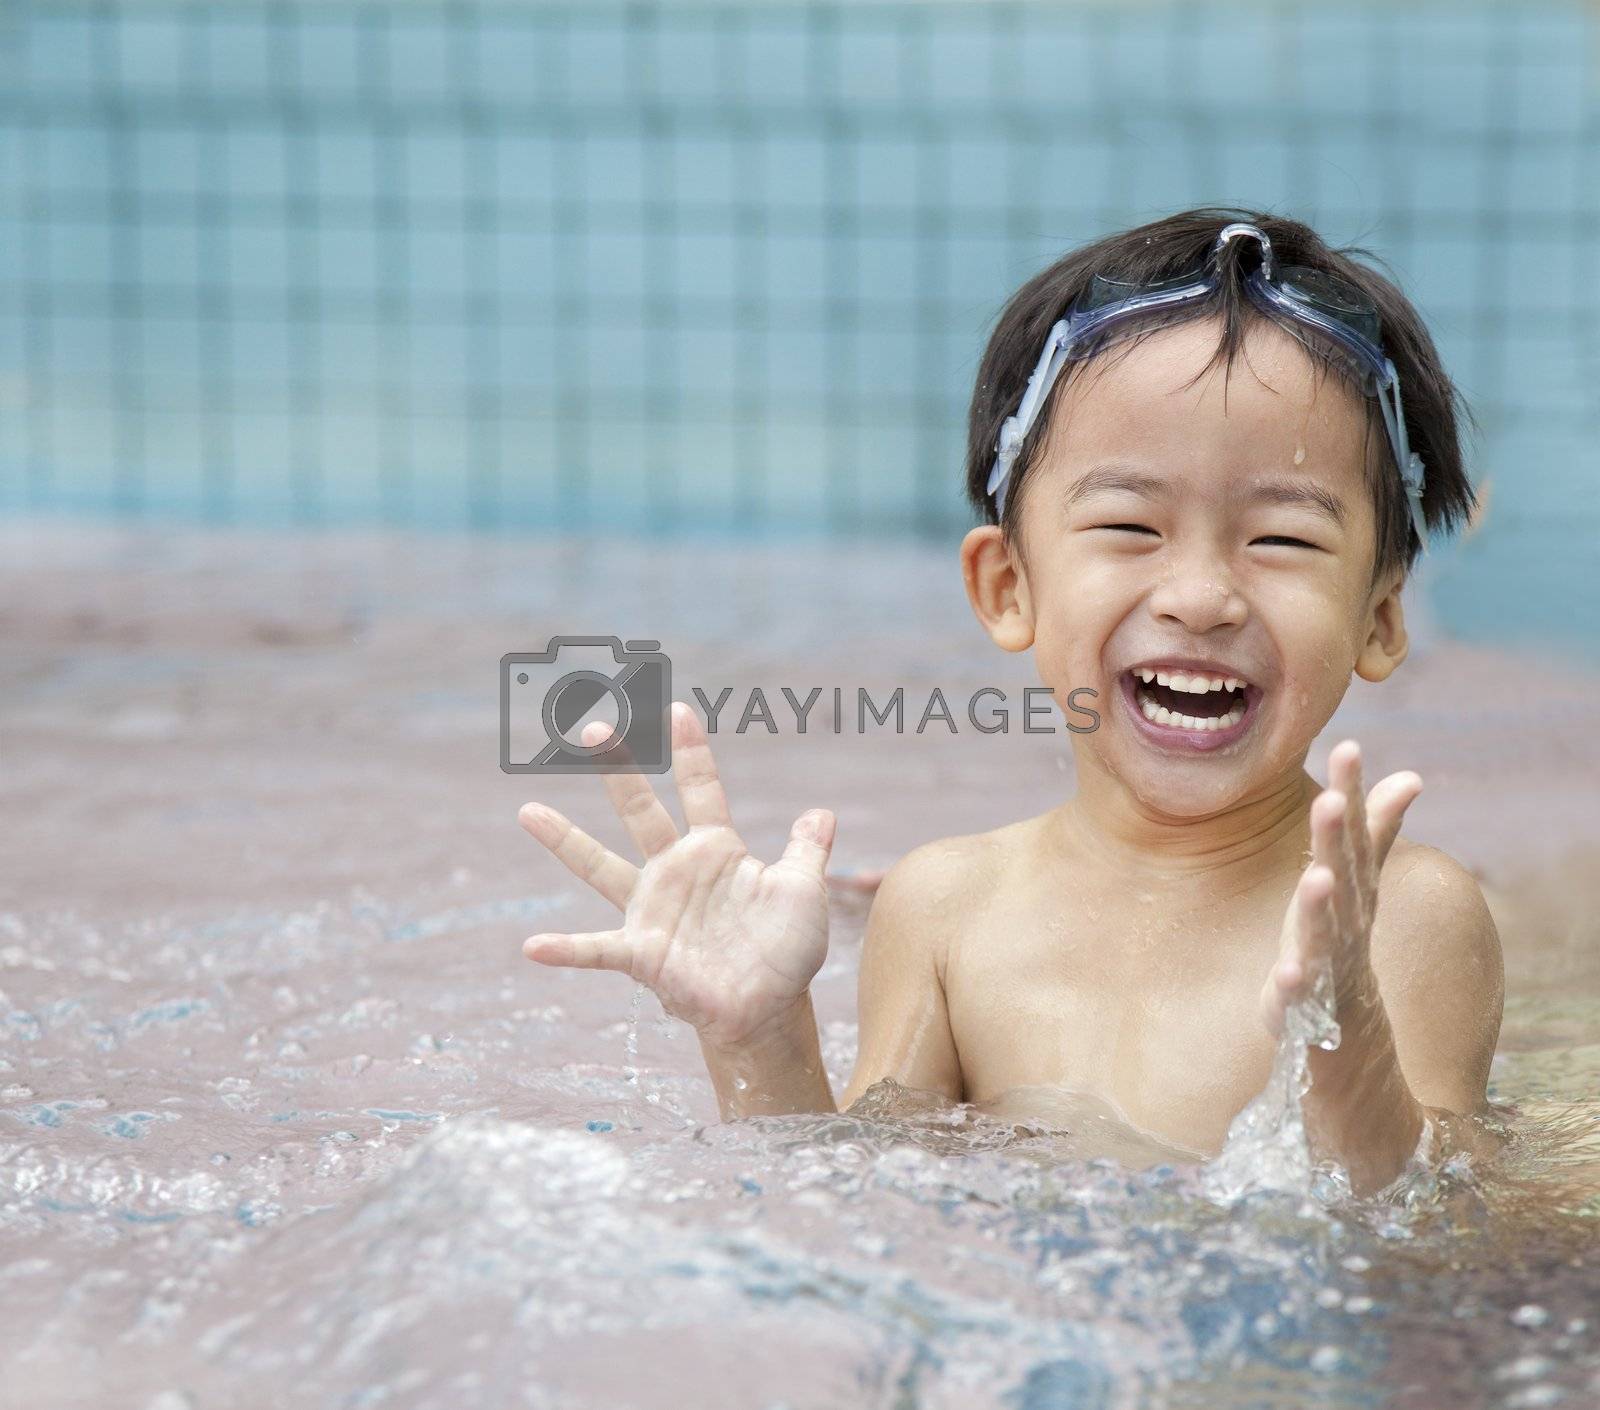 Royalty free image of happy kid in the water by tomwang